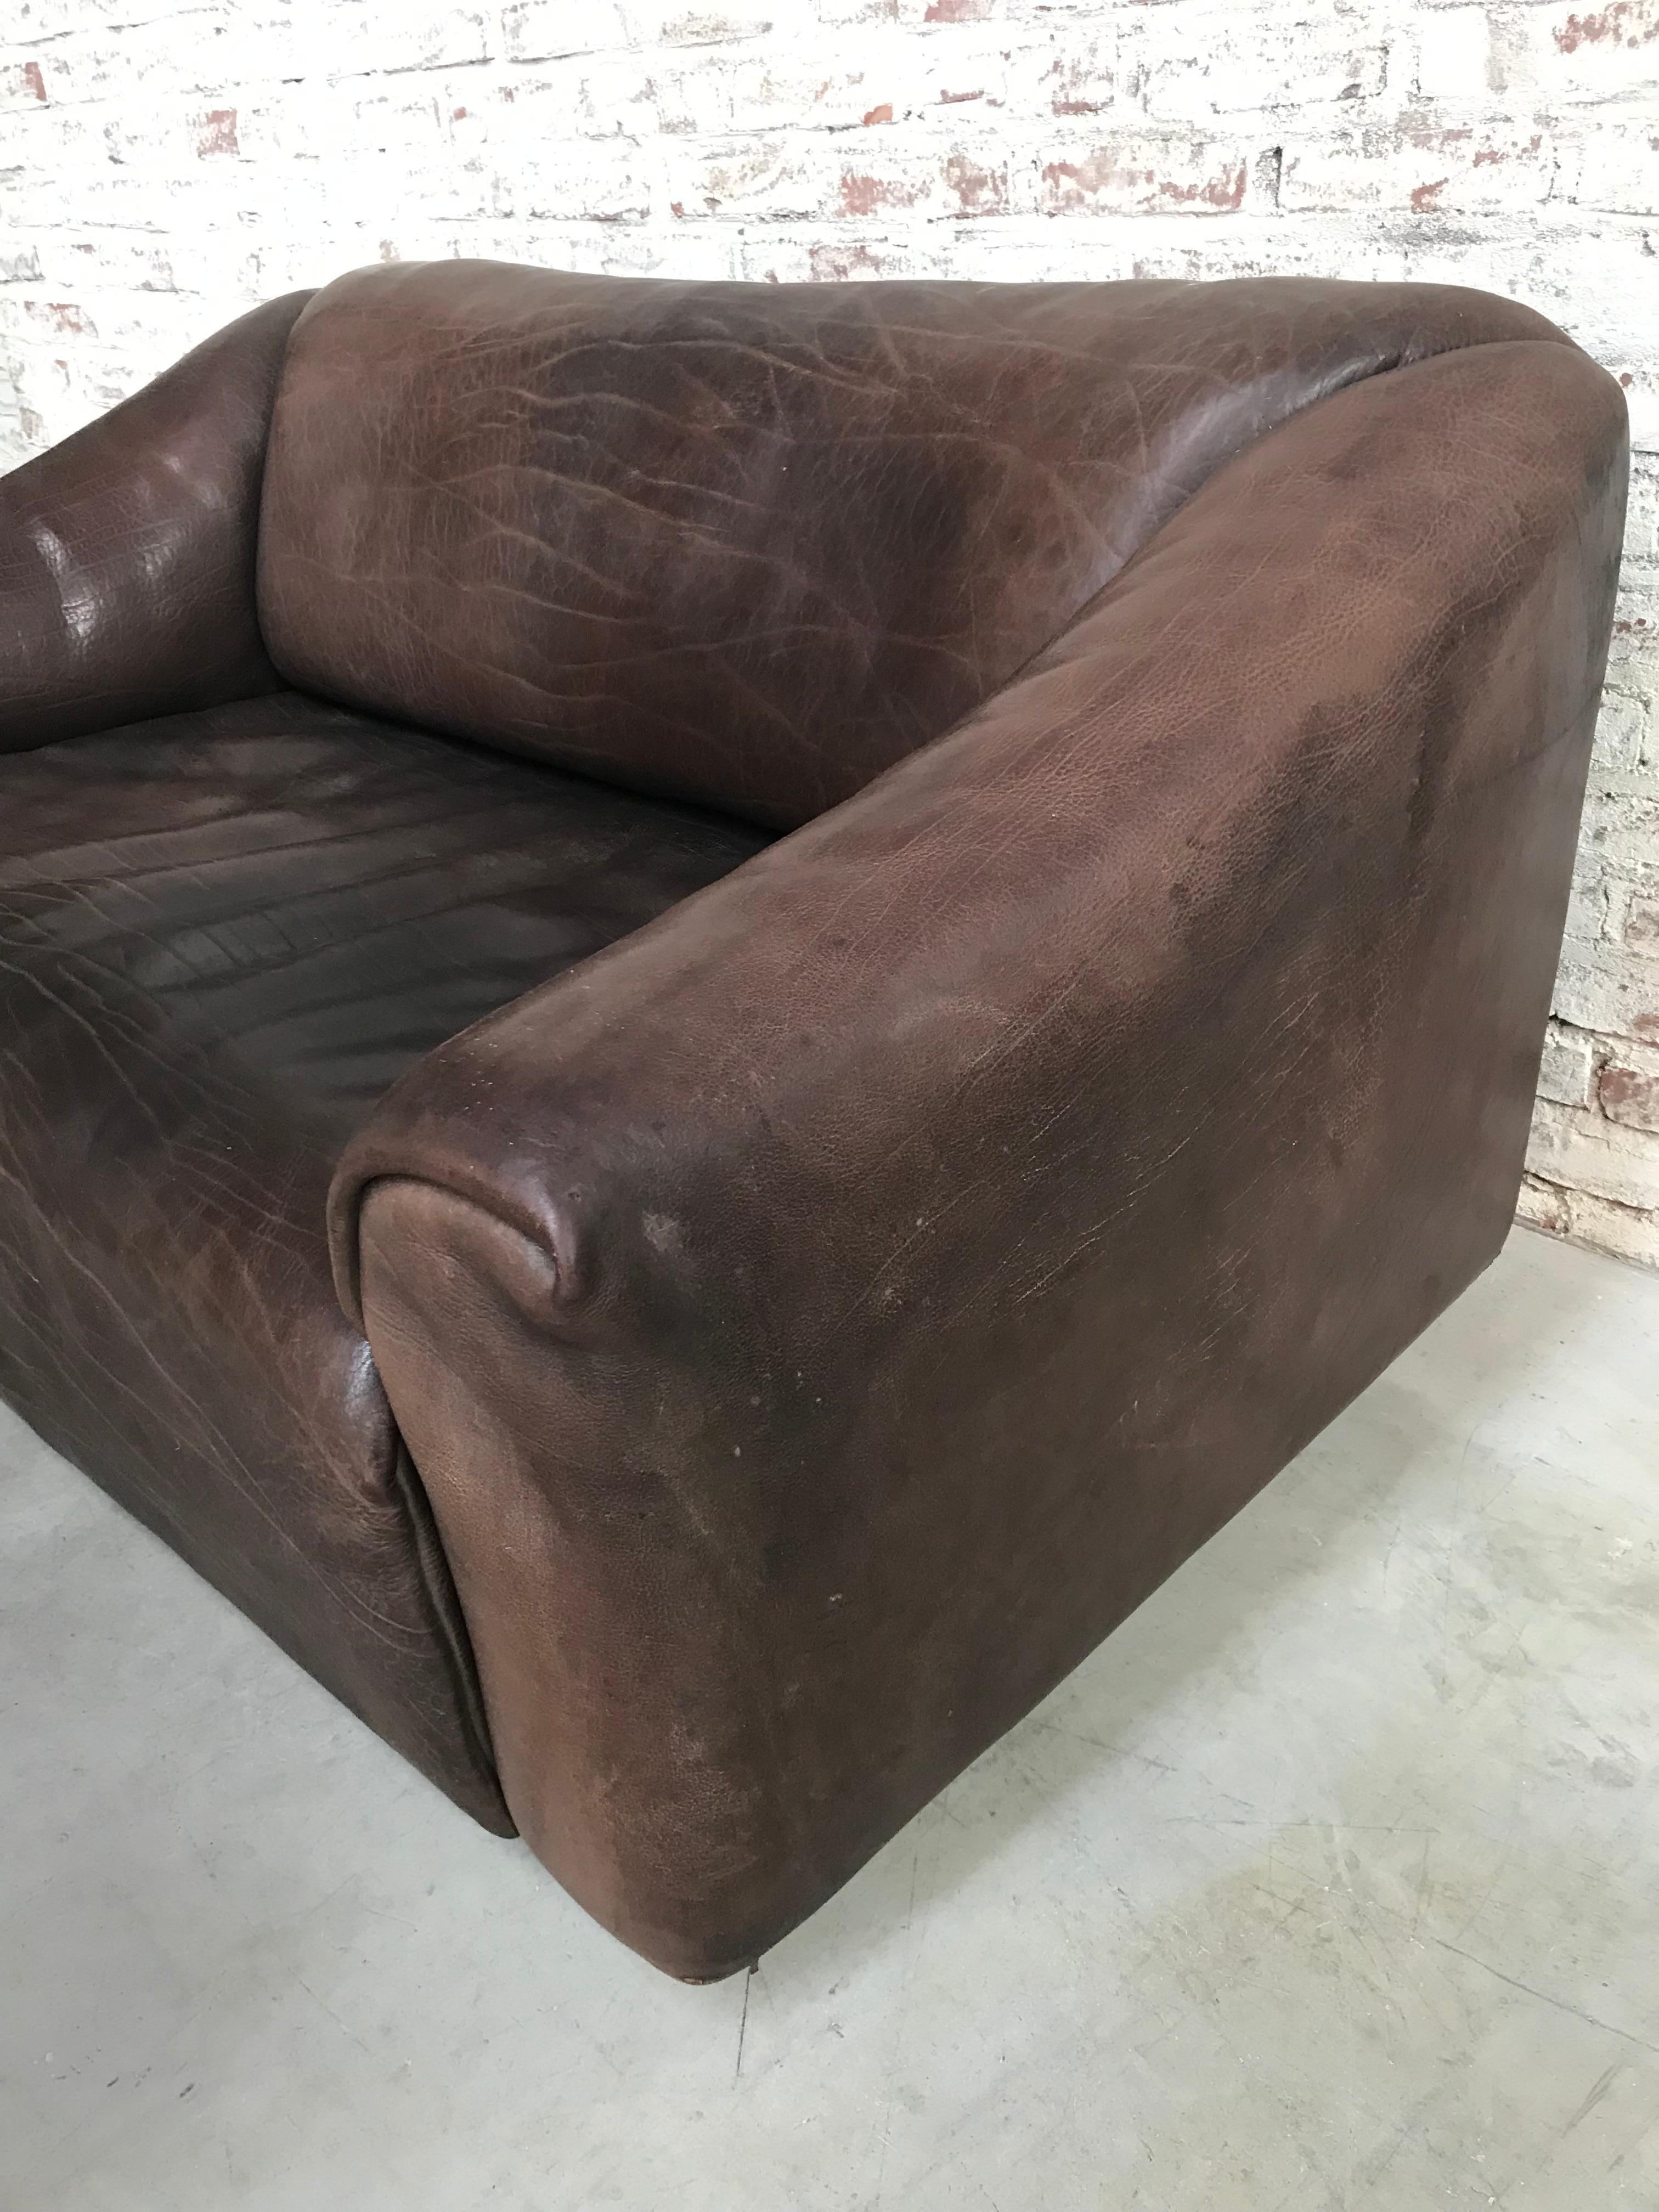 Midcentury Swiss De Sede Ds-47 Two-Seat in Chocolat Neck Leather, 1970s For Sale 3